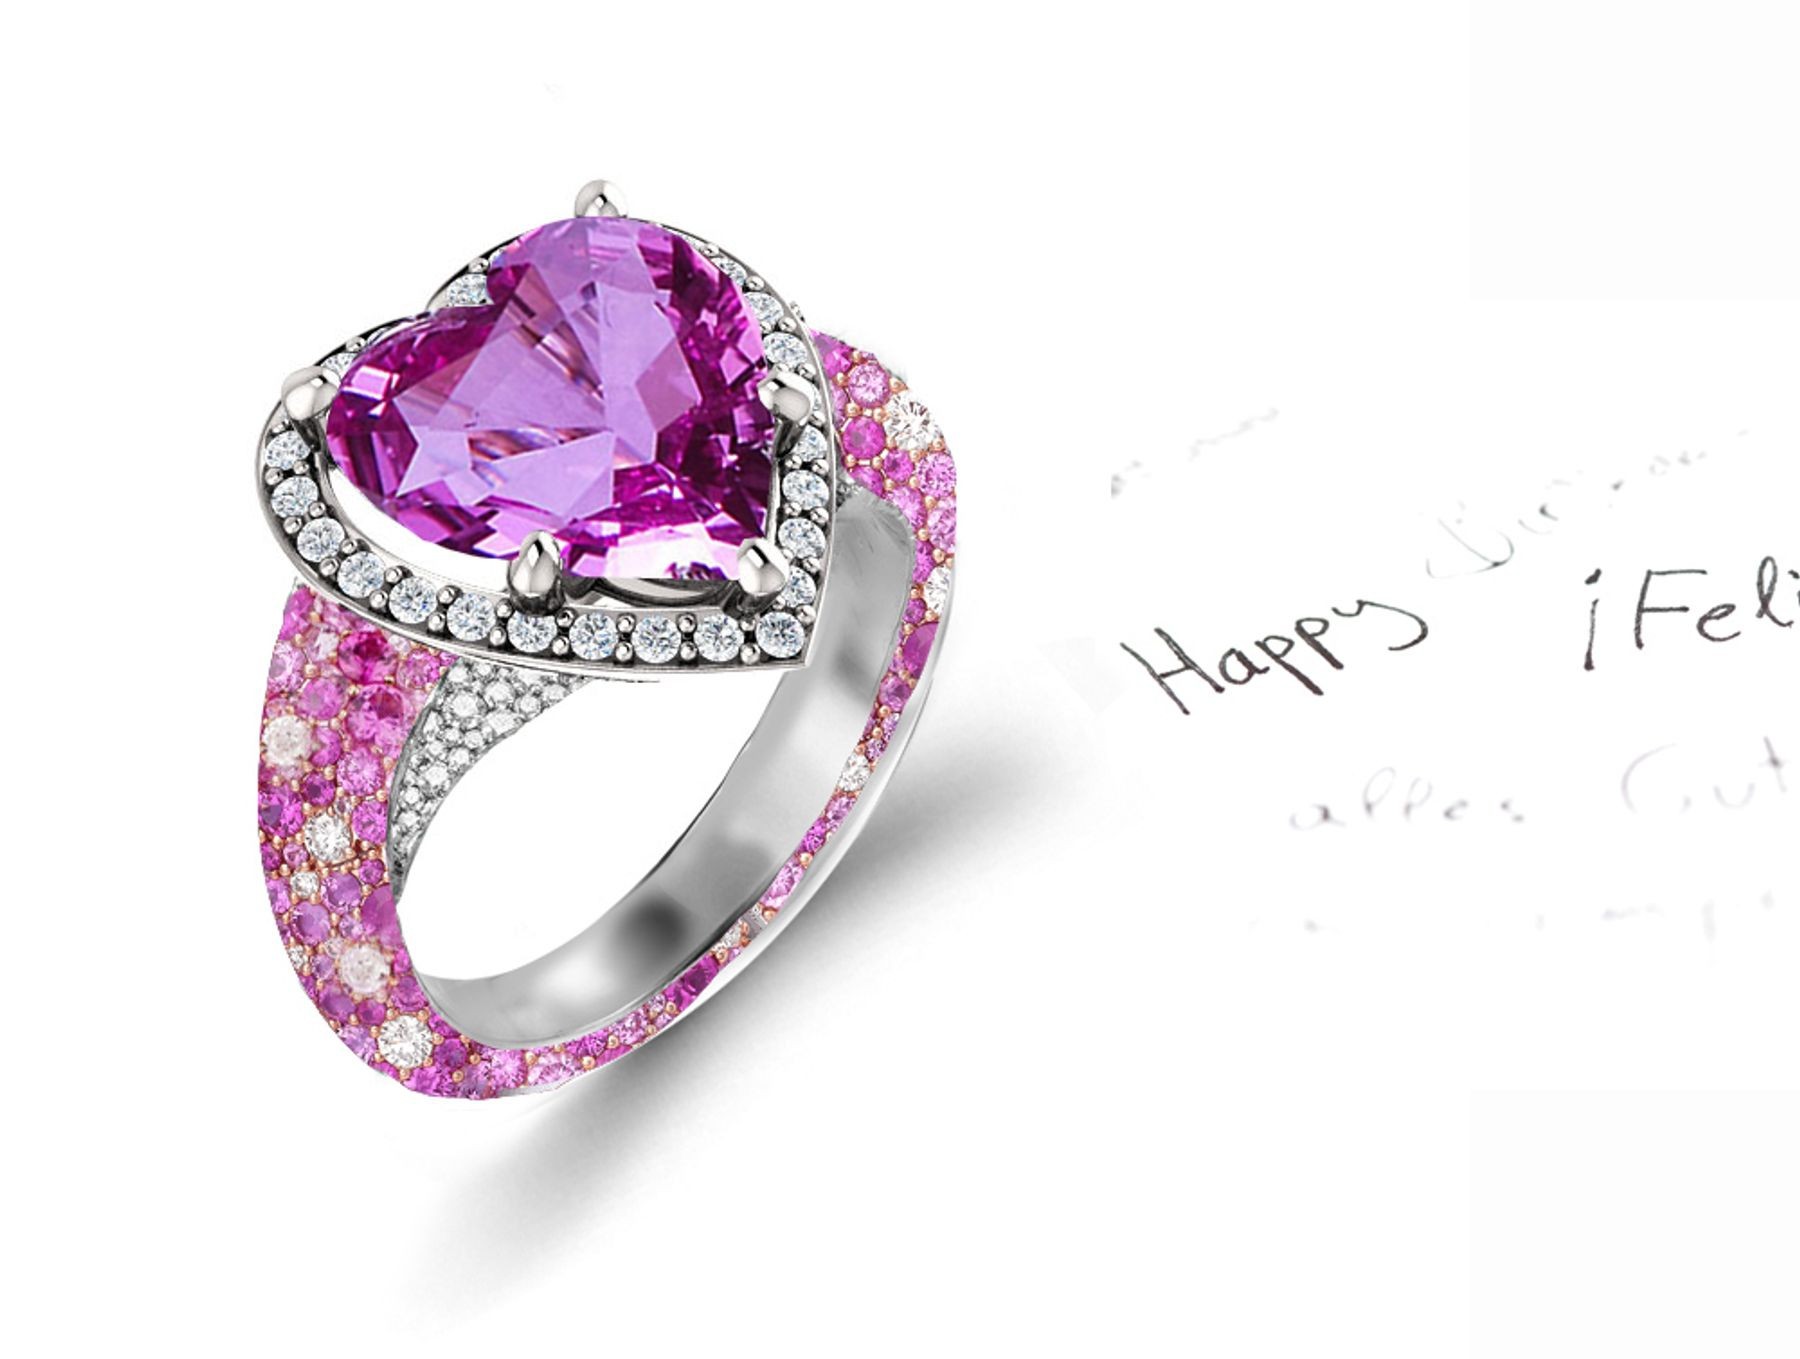 Shop Fine Quality Made To Order Halo pave Diamond & Pink Sapphire Eternity Style Engagement Rings